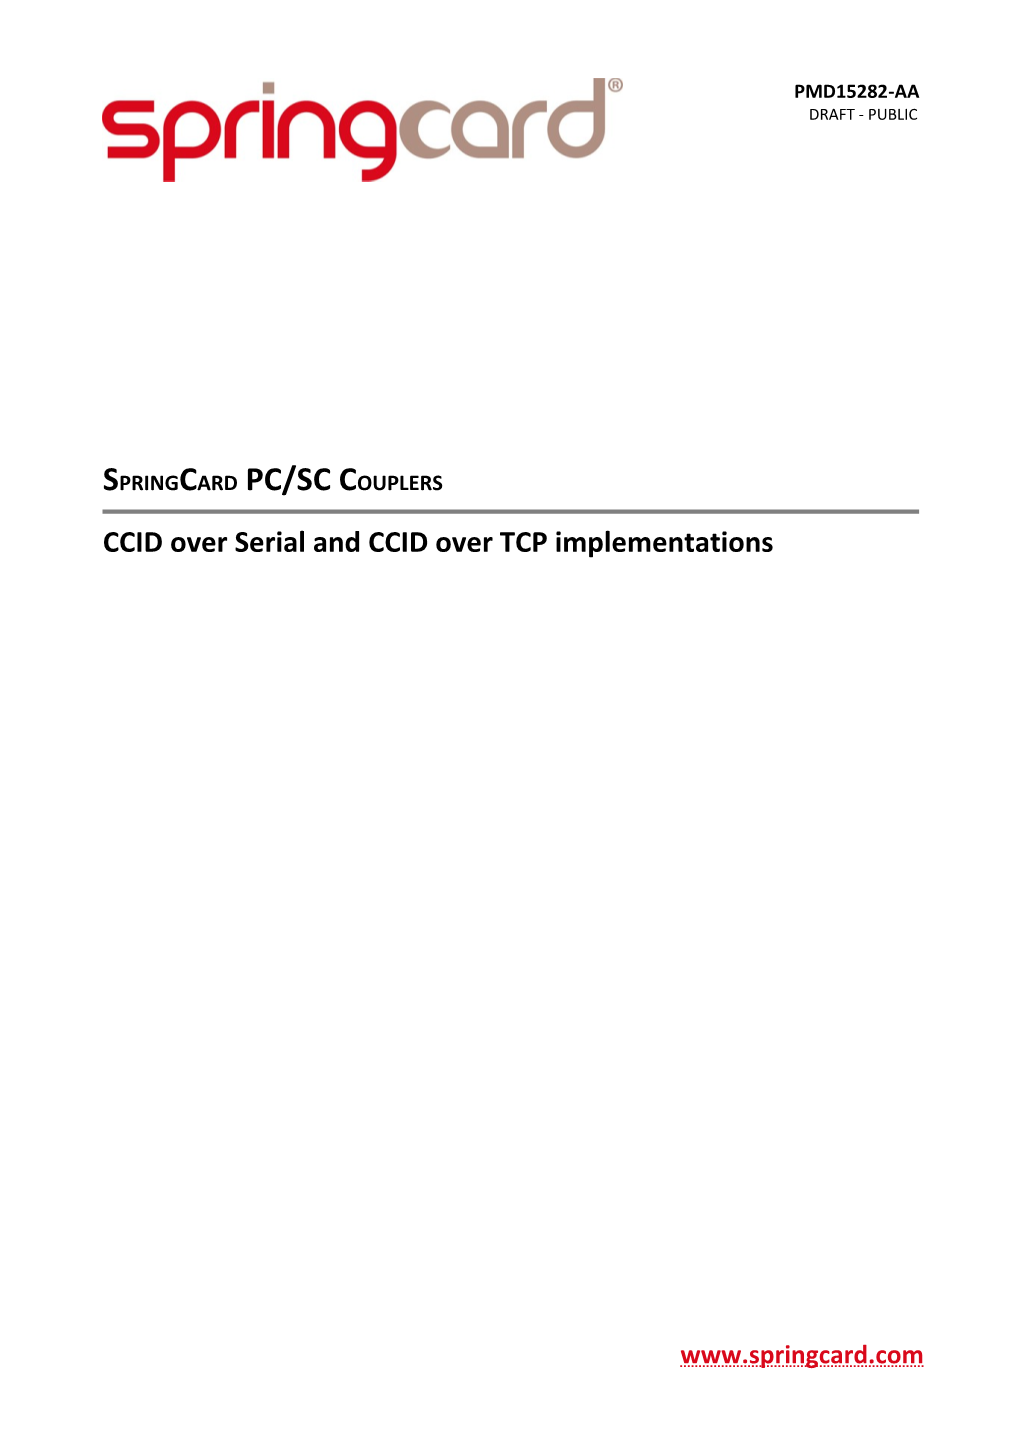 CCID Over Serial and CCID Over TCP Implementations